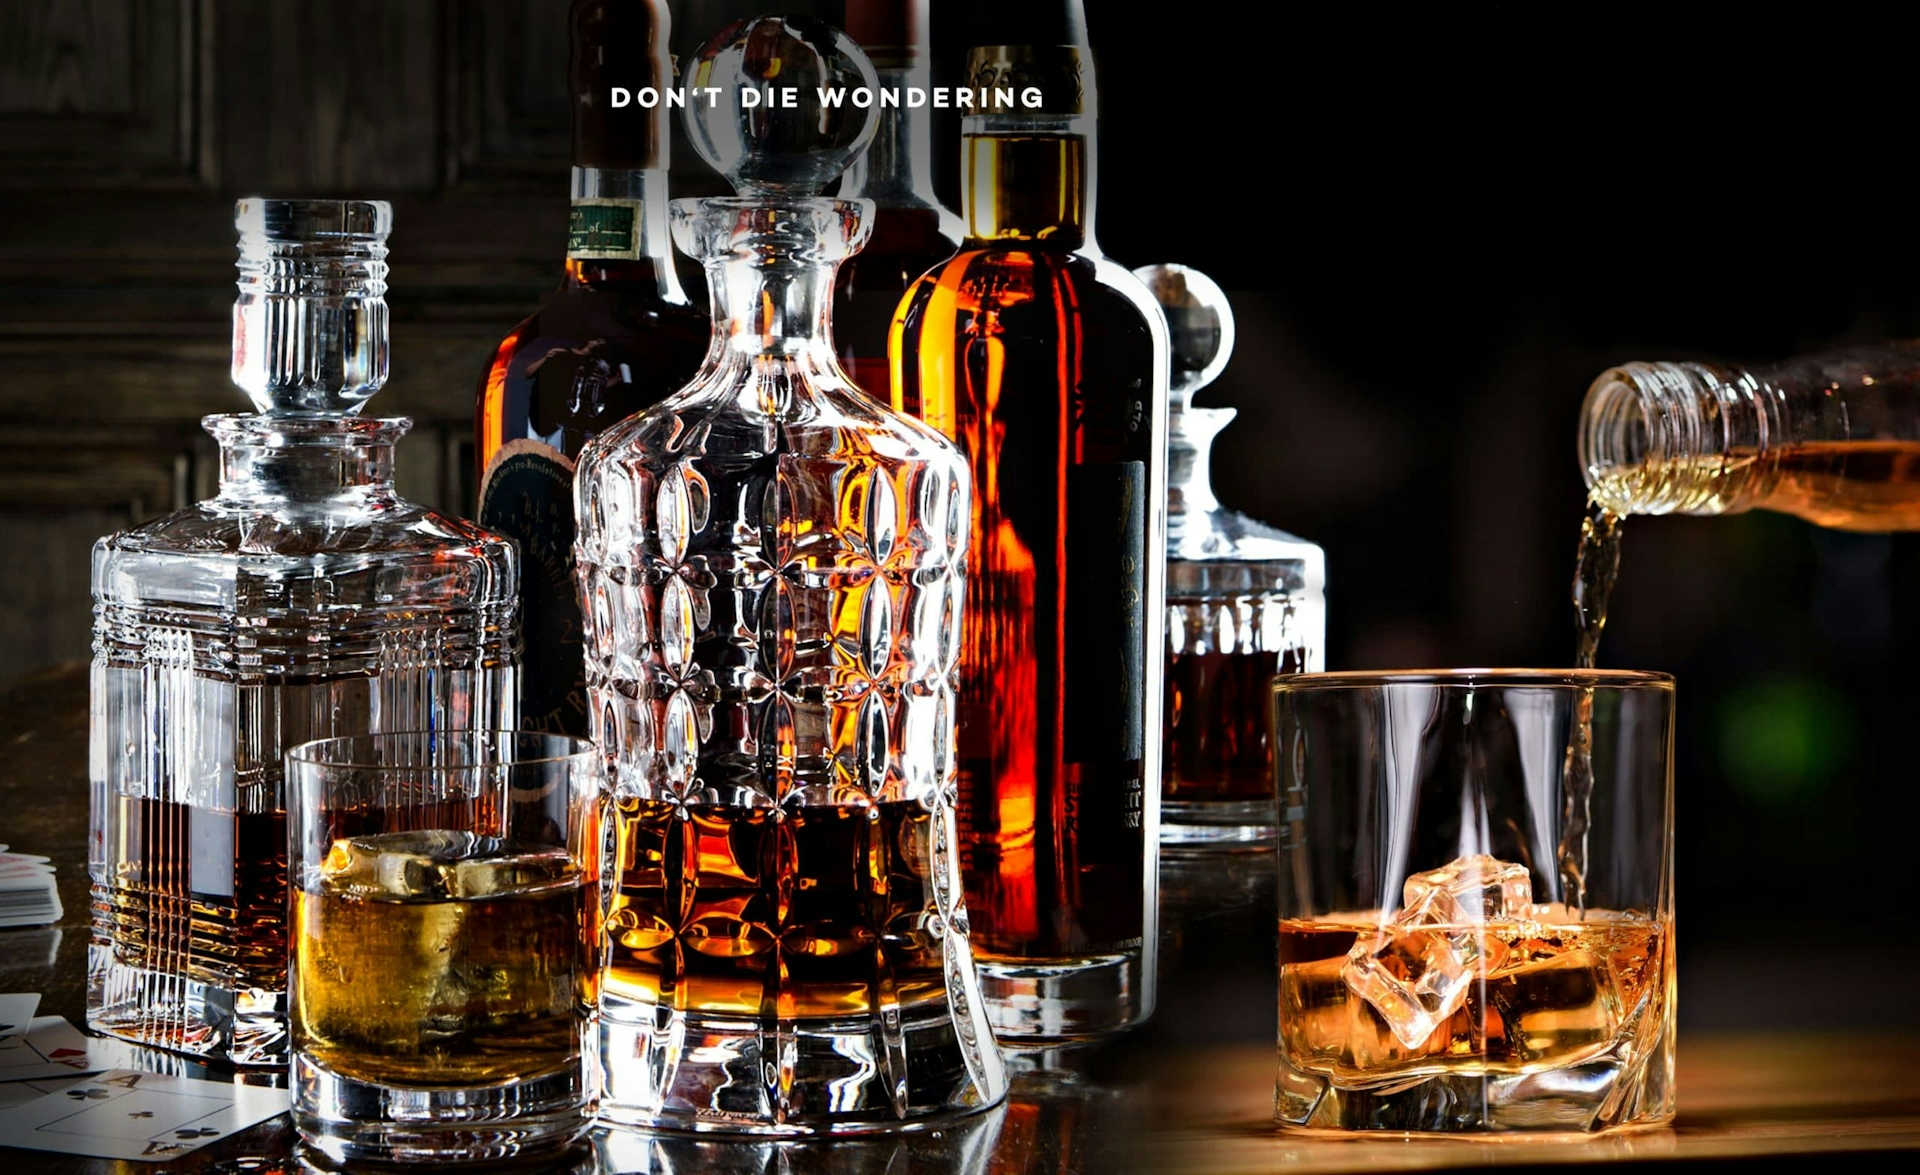 Swag Spotlight: This Premium Whisky Collection Makes For The Ultimate Night In!